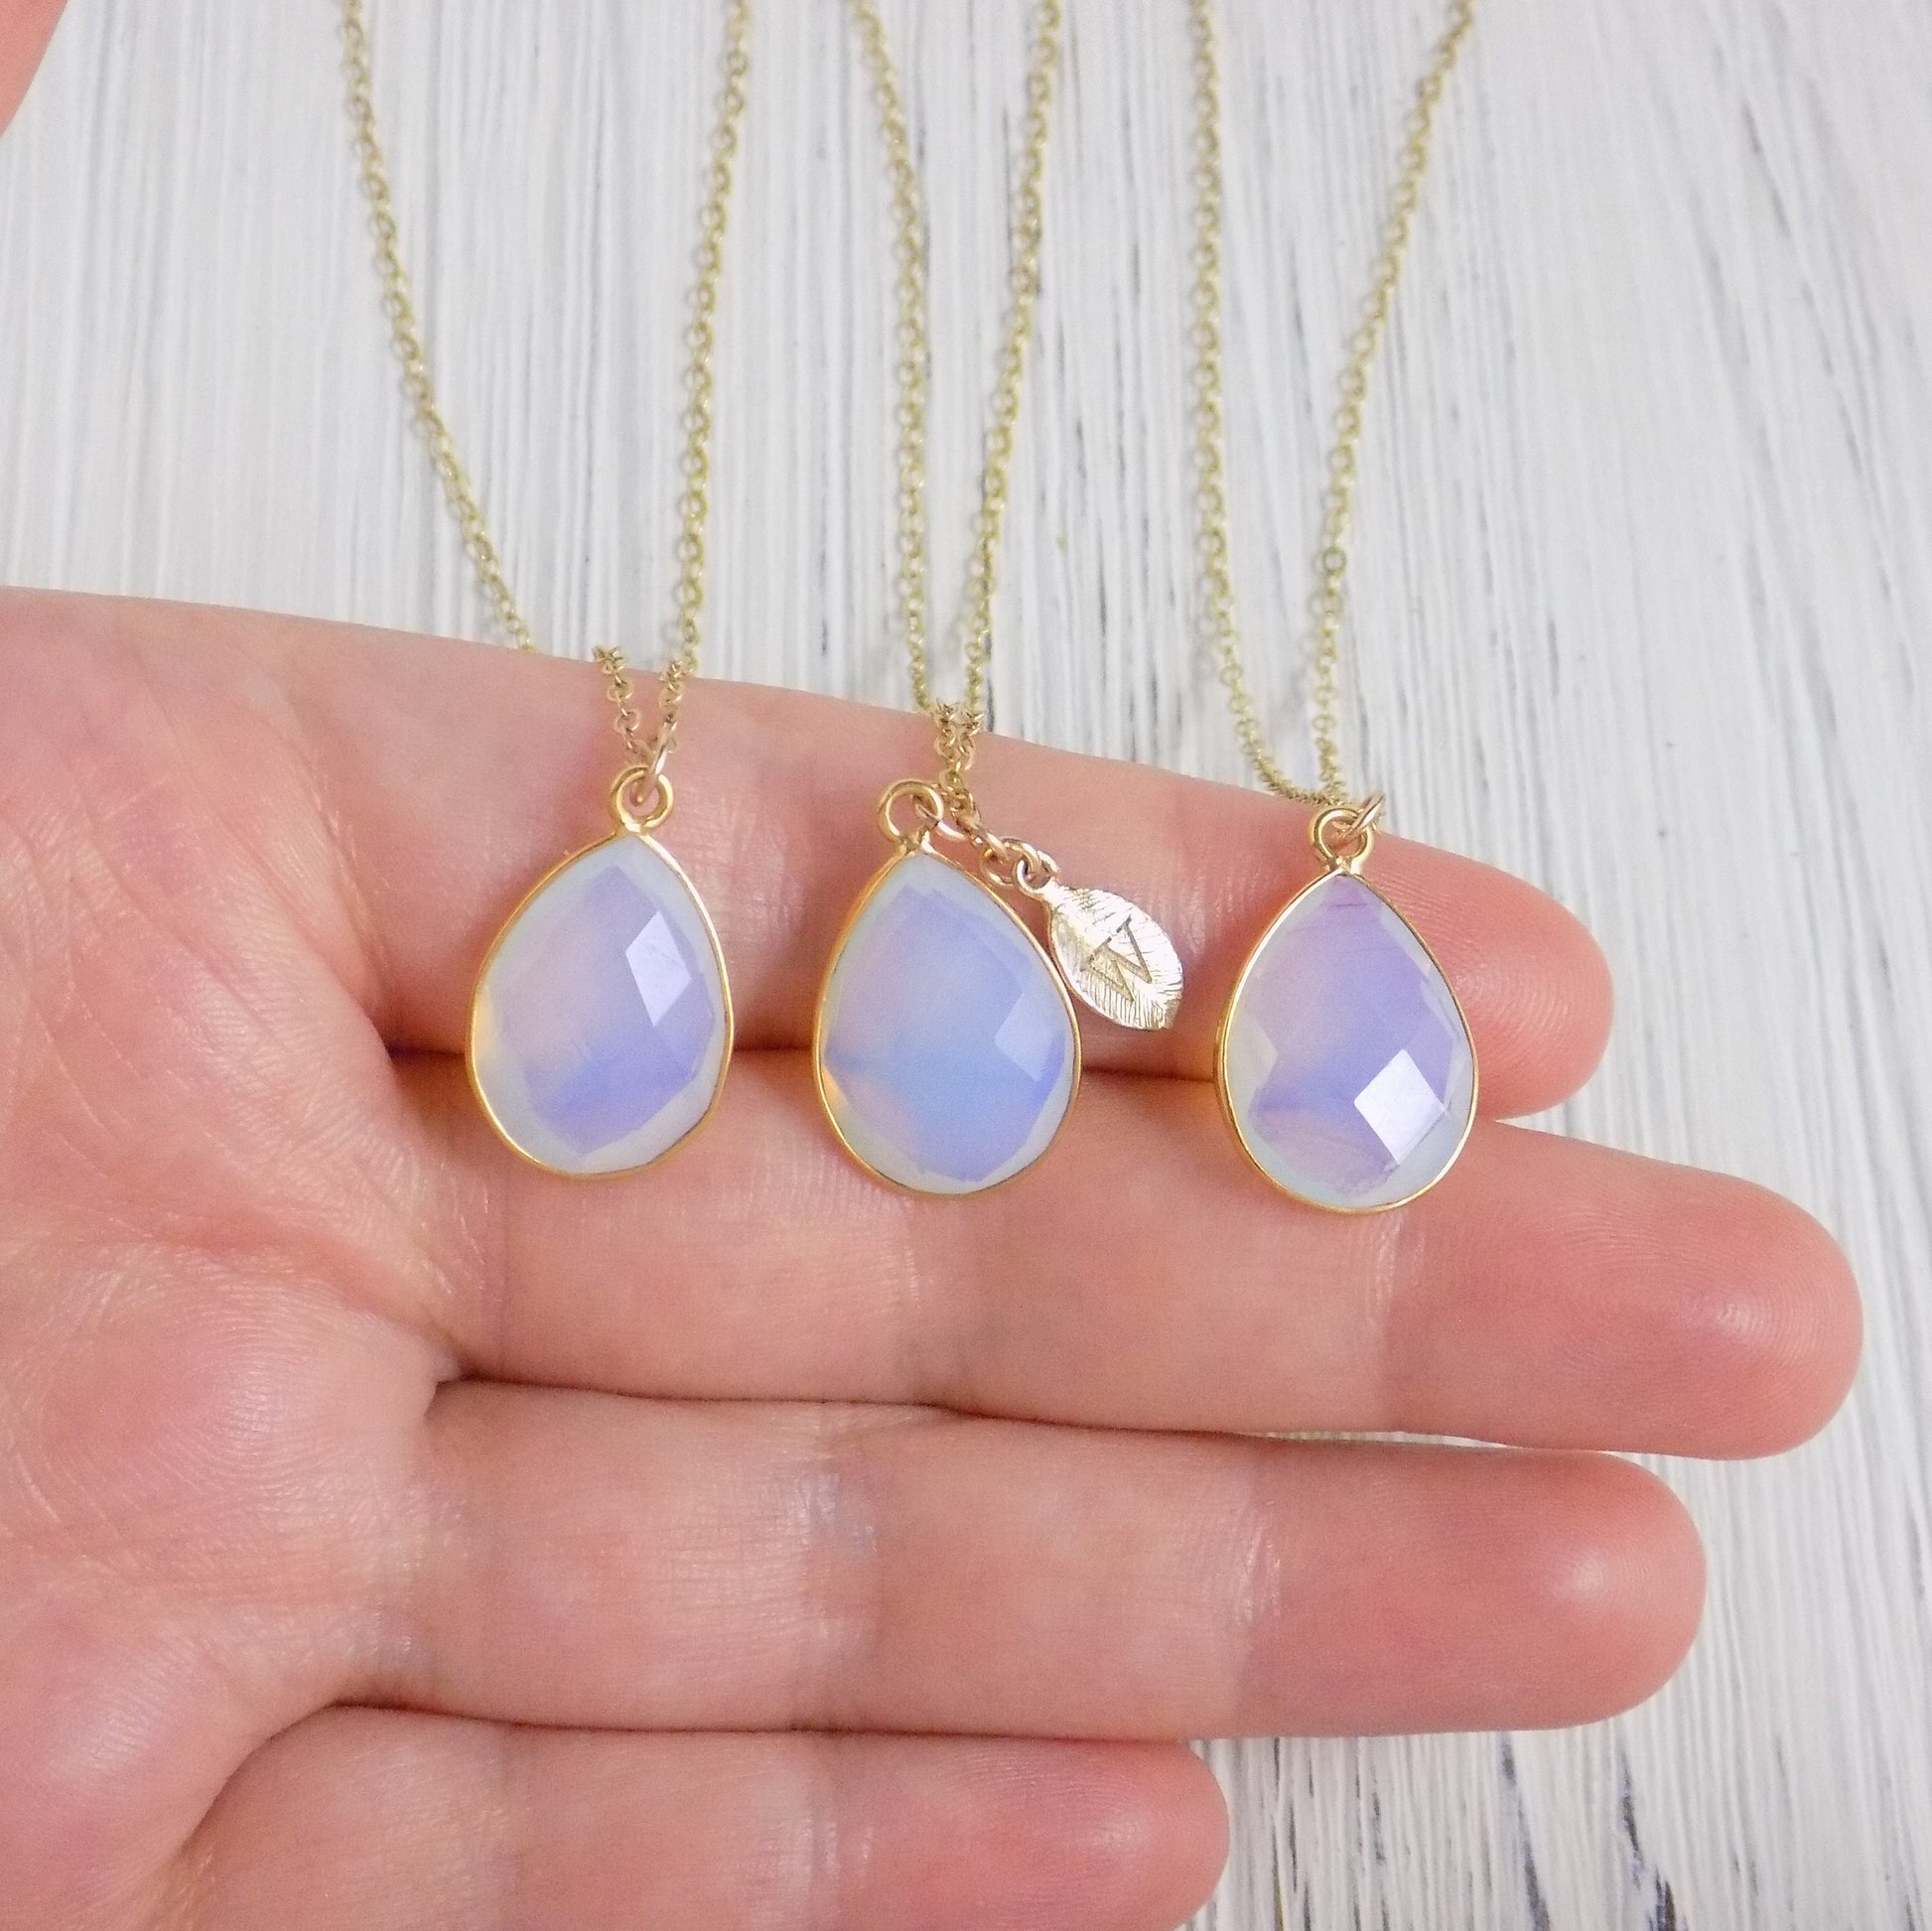 October Birthstone, Opalite Necklace Gold, Personalized Opal With Initial Charm, Teardrop Stone Faceted, Birthday Gift Women, M3-68